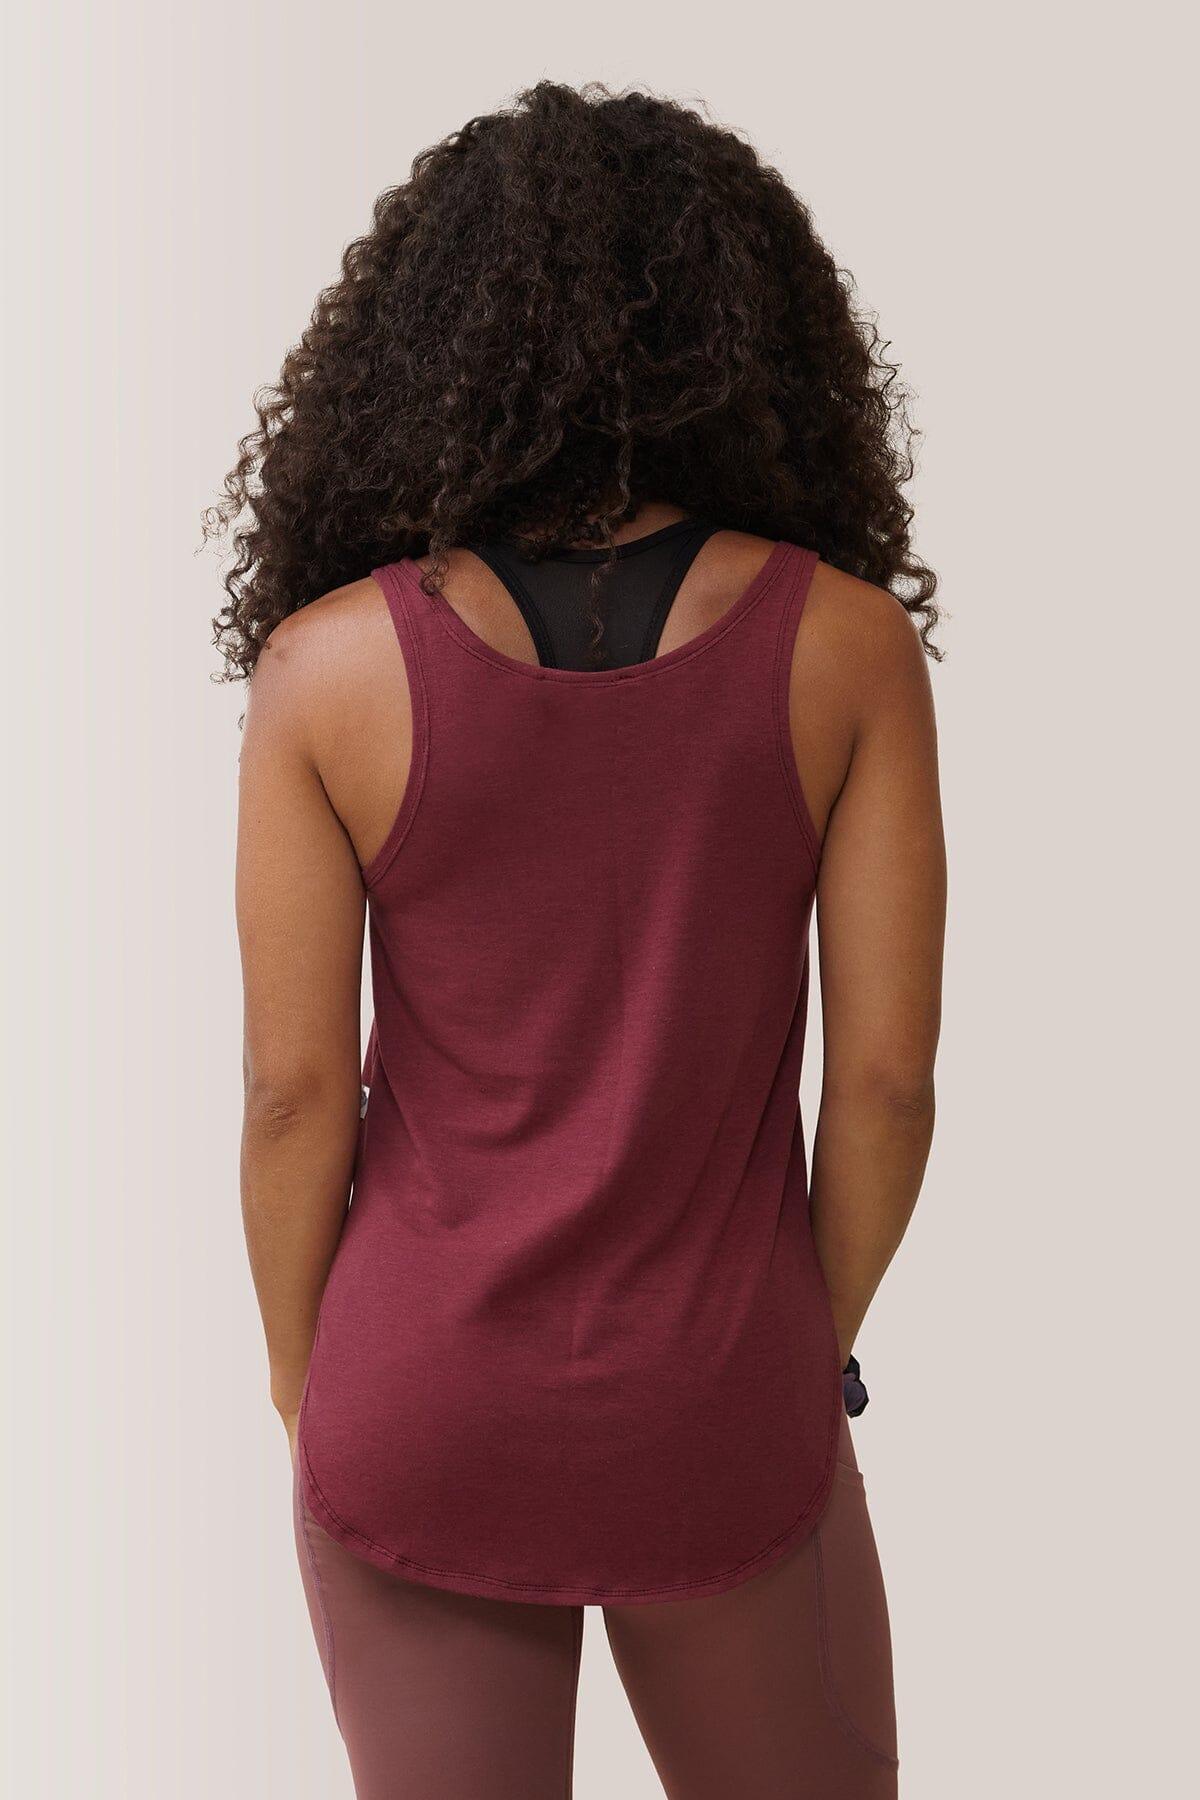 Femme qui porte la camisole Hello Gorgeous! de Rose Boreal./ Women wearing the Hello Gorgeous! Tank Top from Rose Boreal. -Cassis